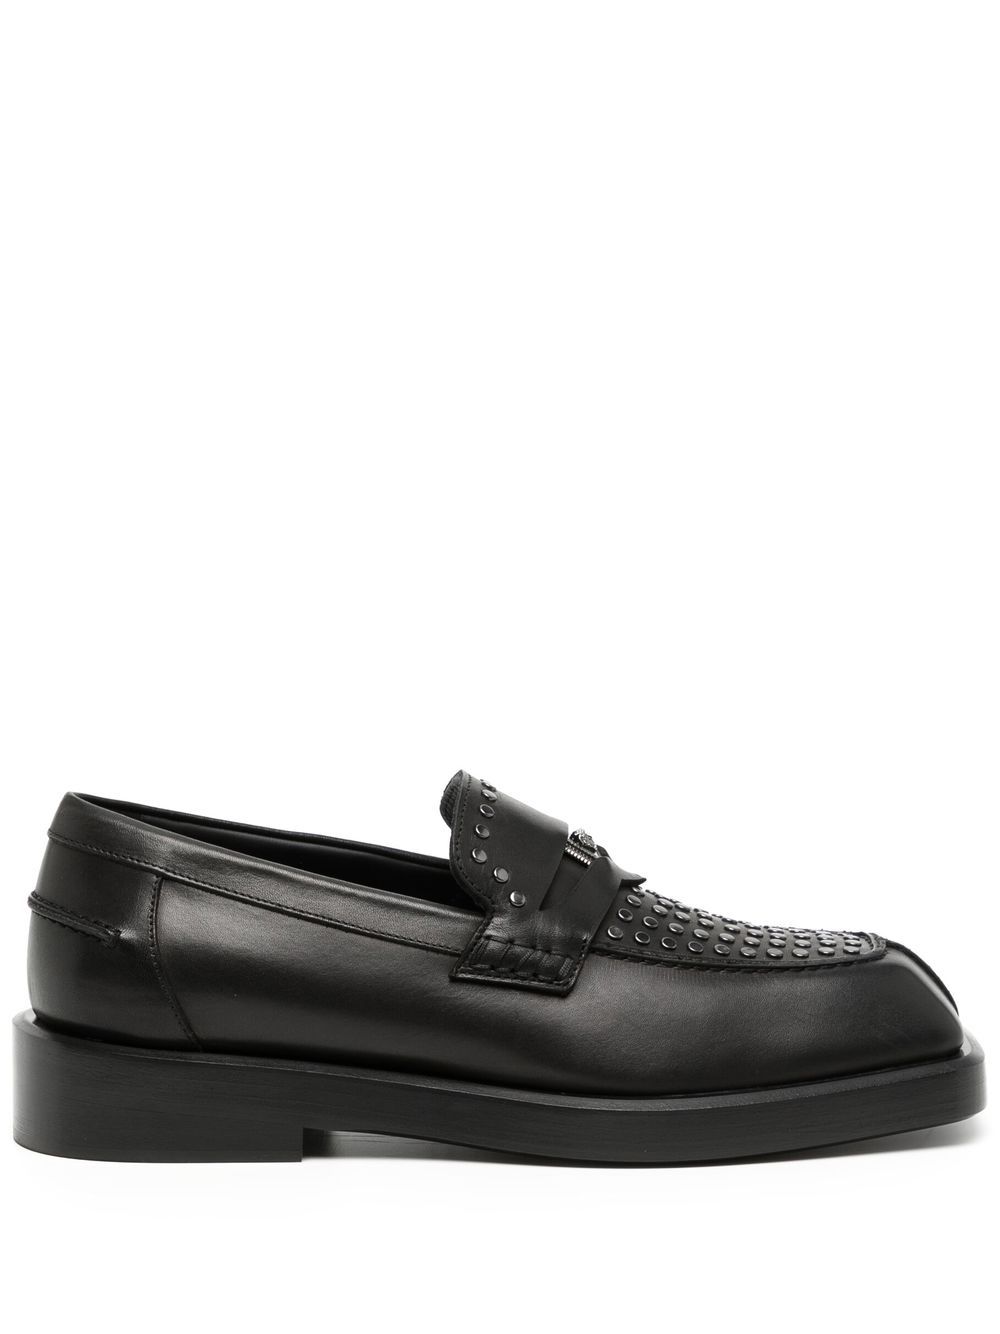 Versace leather studded loafers - Black